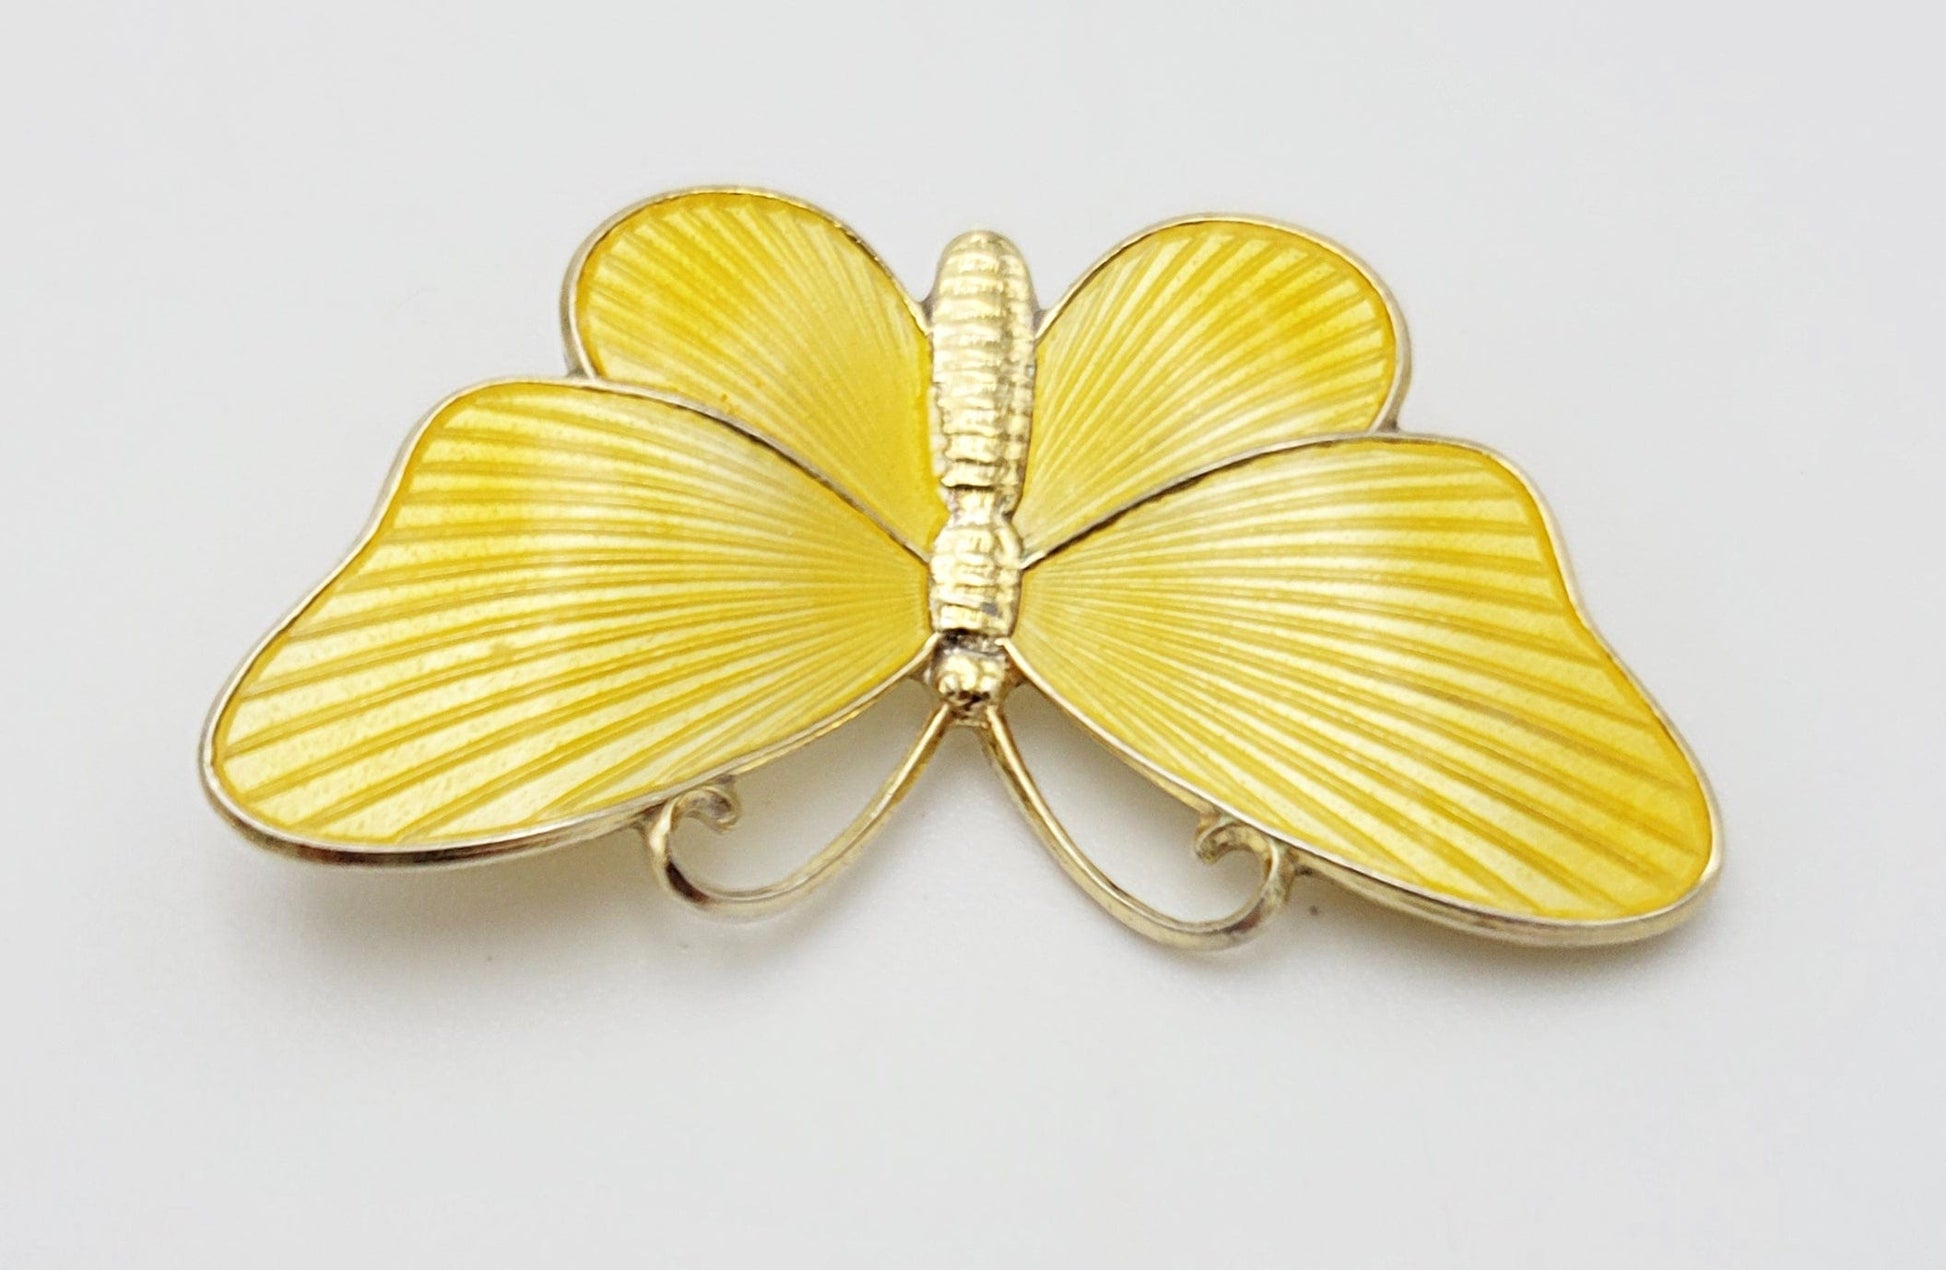 Ivar Holth Jewelry Norwegian Ivar Holth Sterling Yellow Enamel Large Butterfly Brooch 1940s/50s